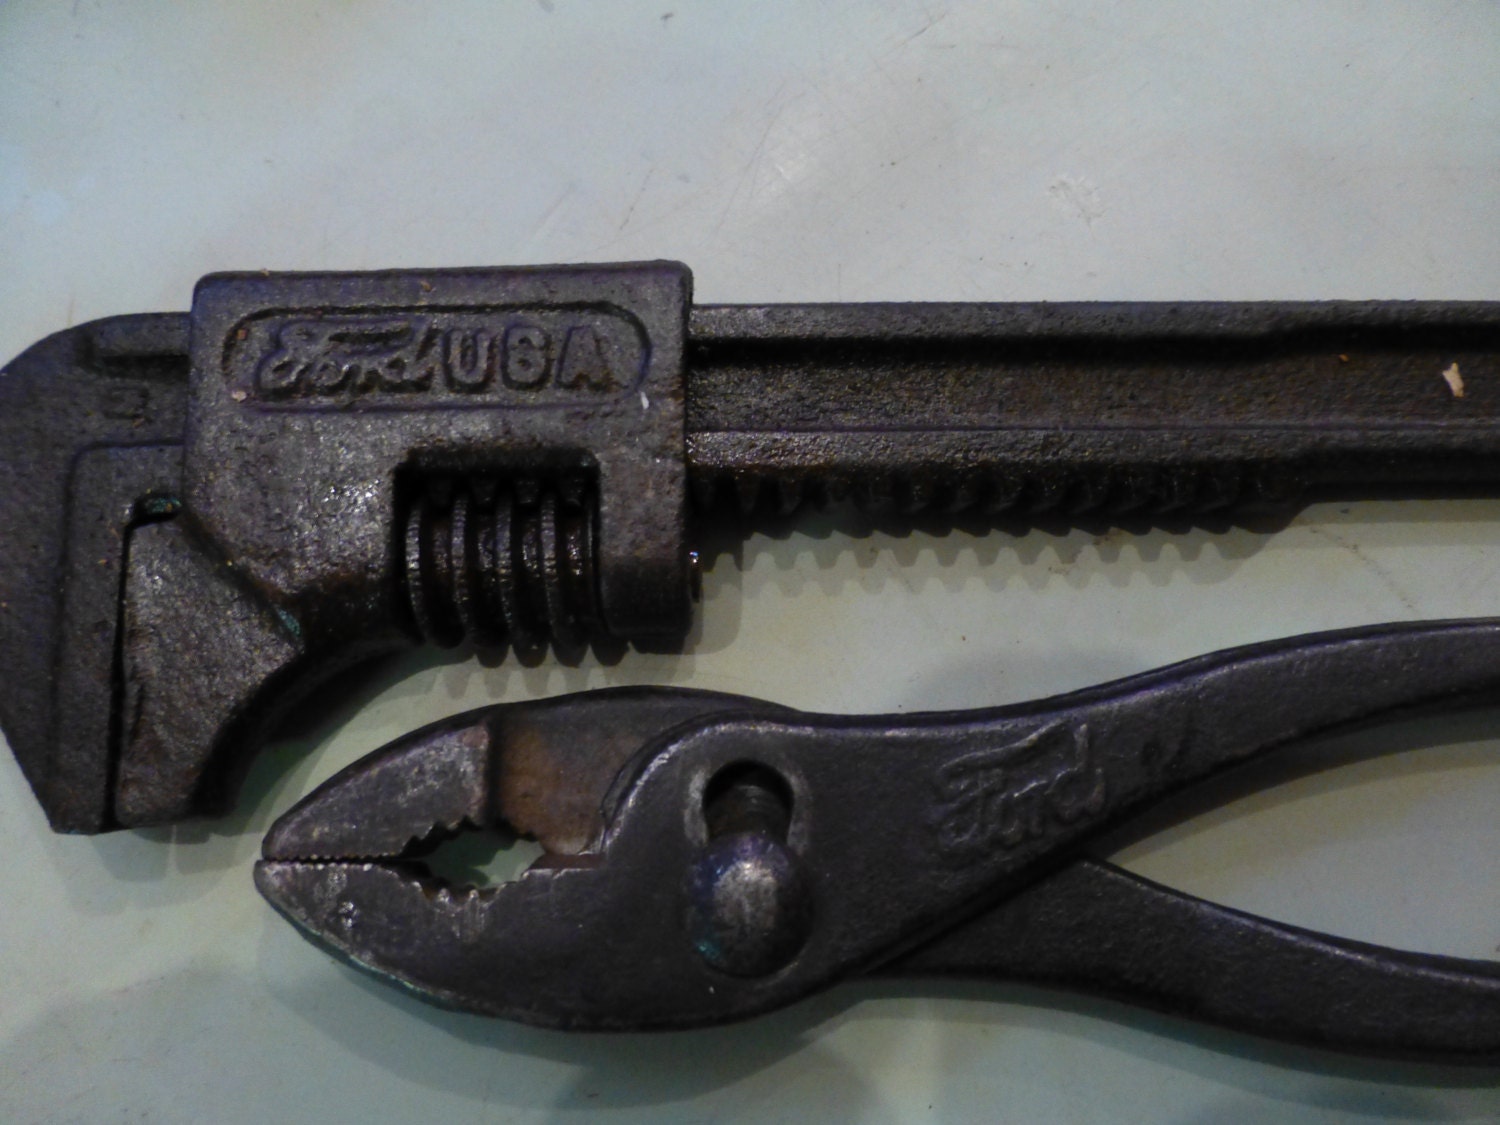 Ford adjustable wrench m #10